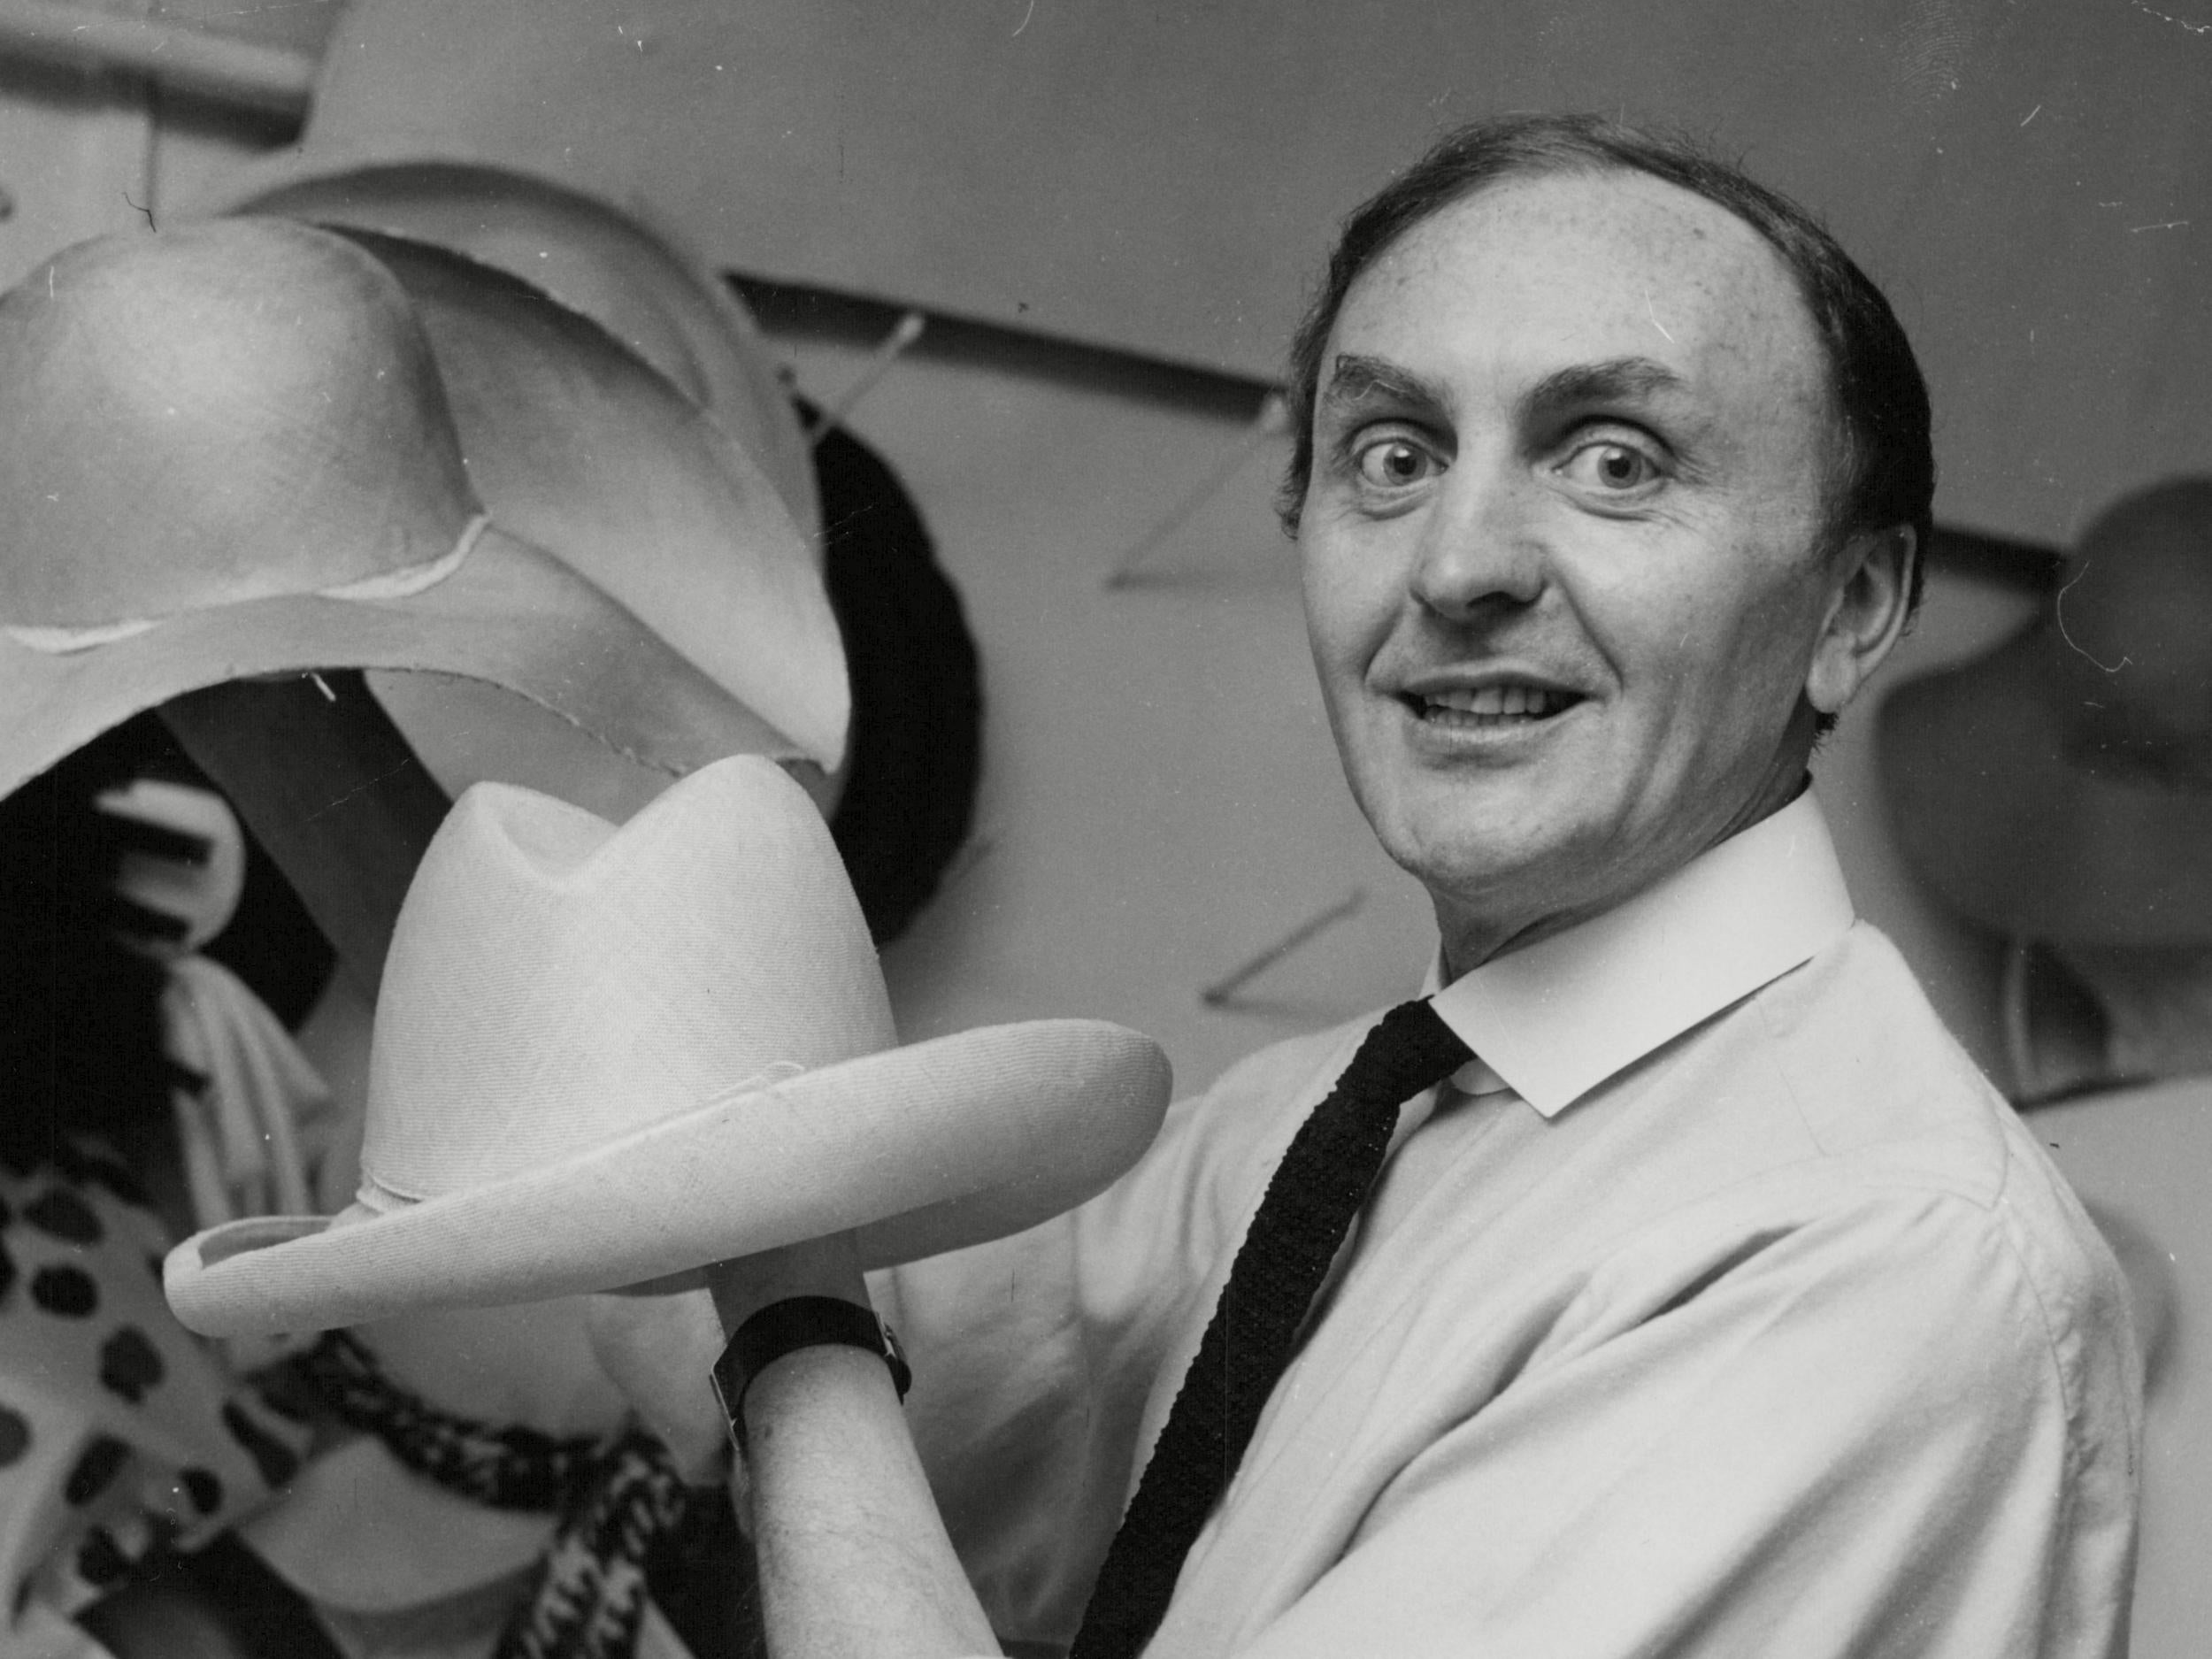 When Boyd started out, there were no fewer than 44 milliners in Beauchamp Place, then known as milliner’s row. His shop was, and remains, the last millinery on that street